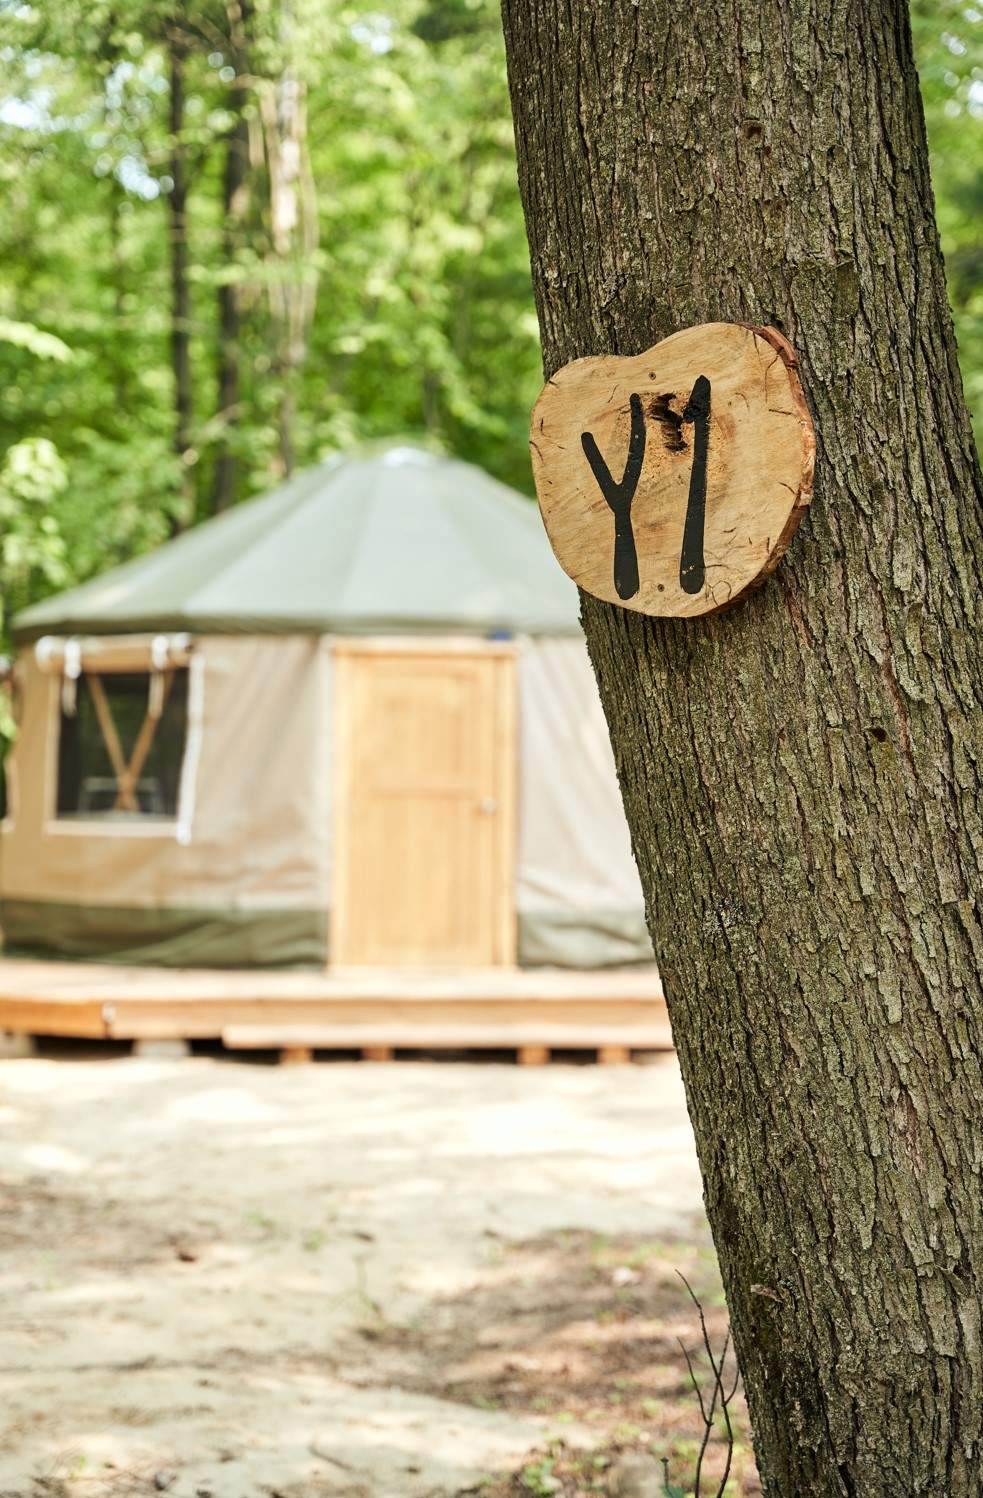 Featured image for “Yurt (Y1)”